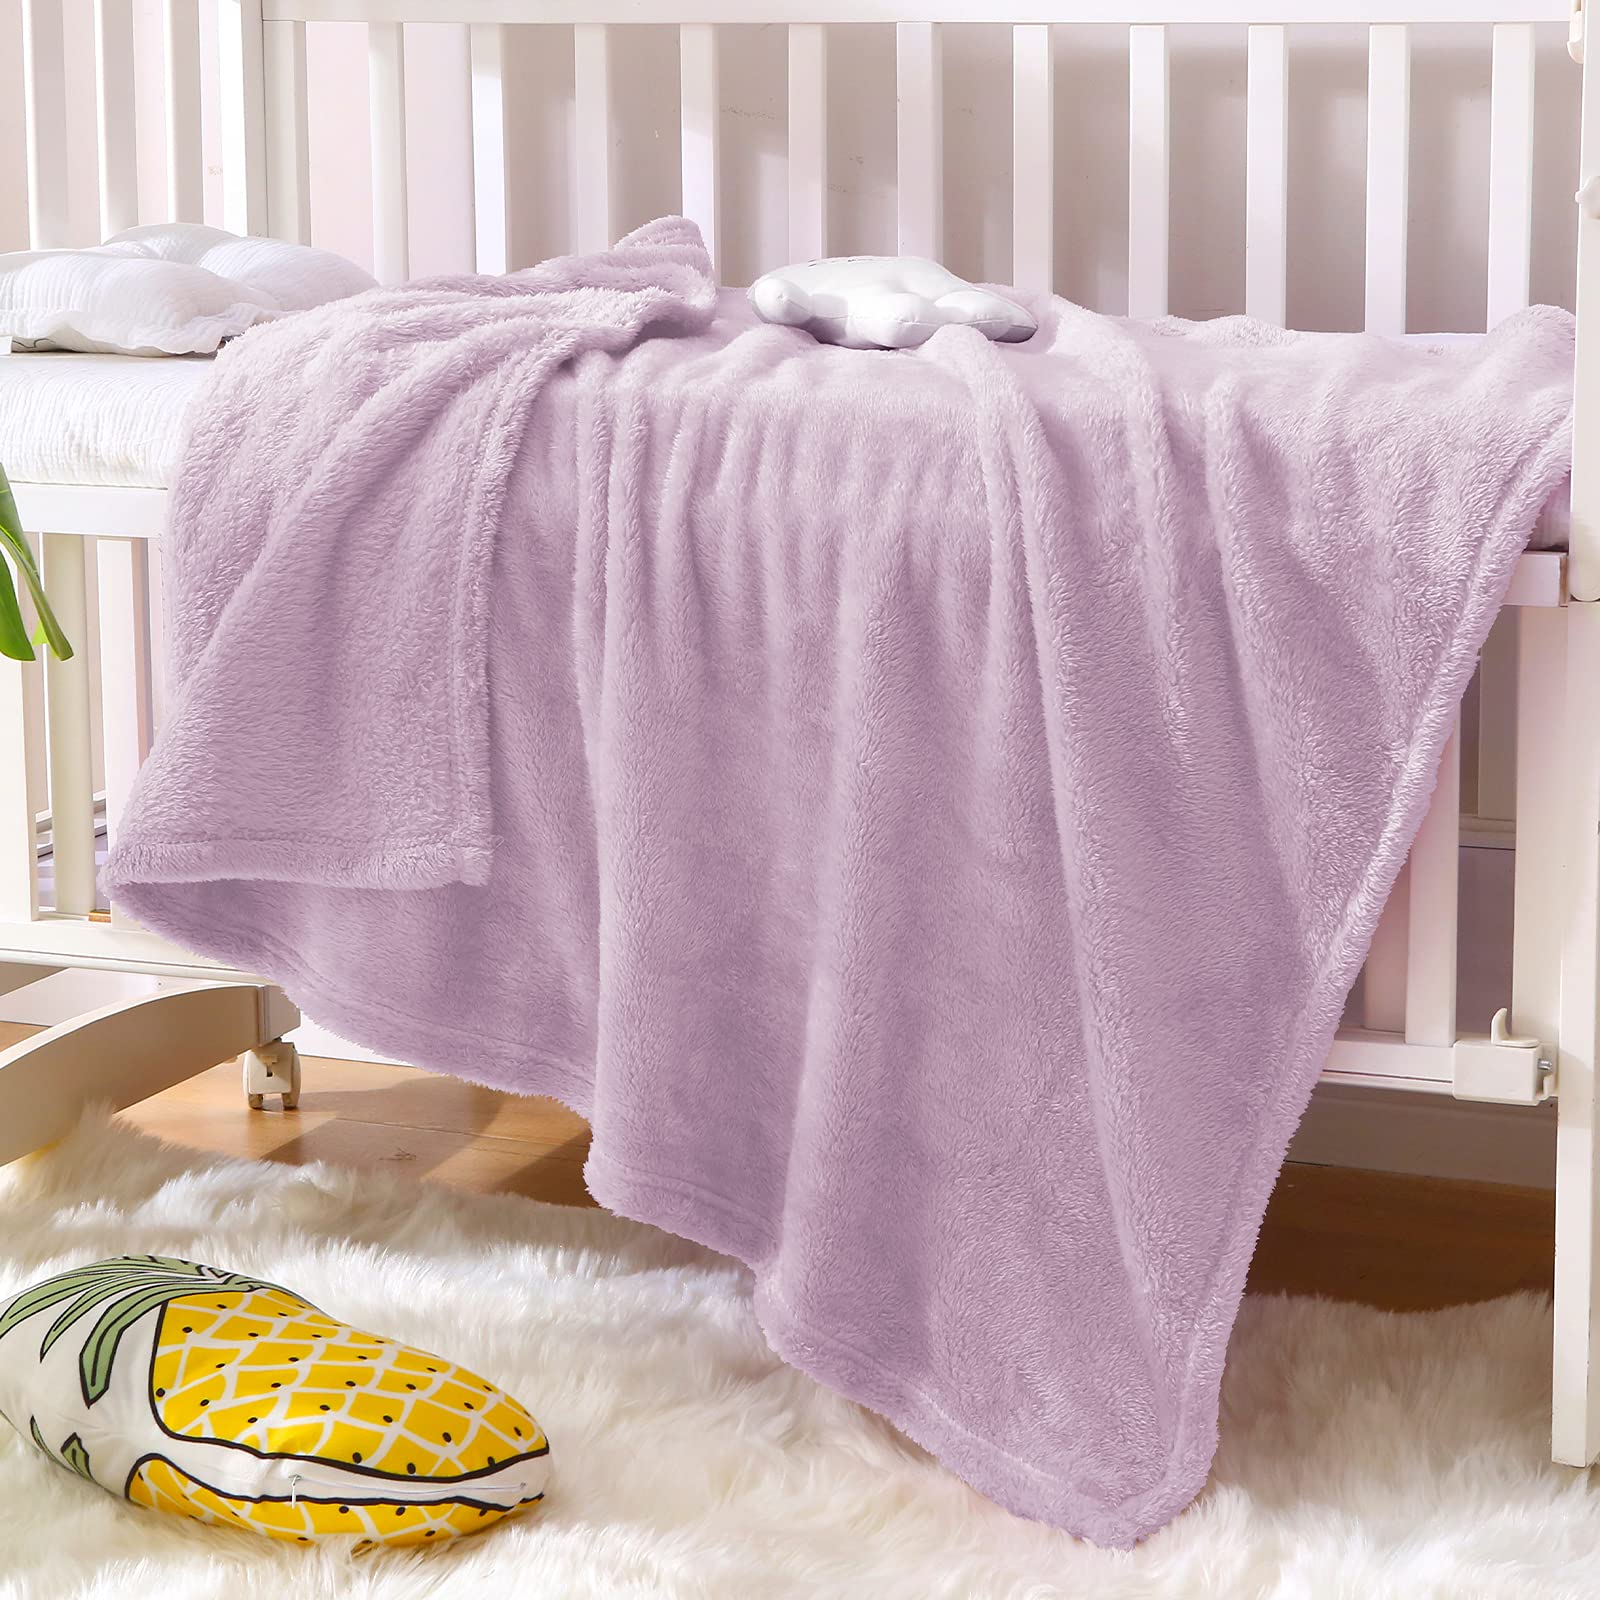 Exclusivo Mezcla Plush Fuzzy Fleece Throw Blanket Kids Size, Super Soft, Fluffy and Warm Blankets for Couch, Bed, All Season Use (40x50 inches, Light Purple)